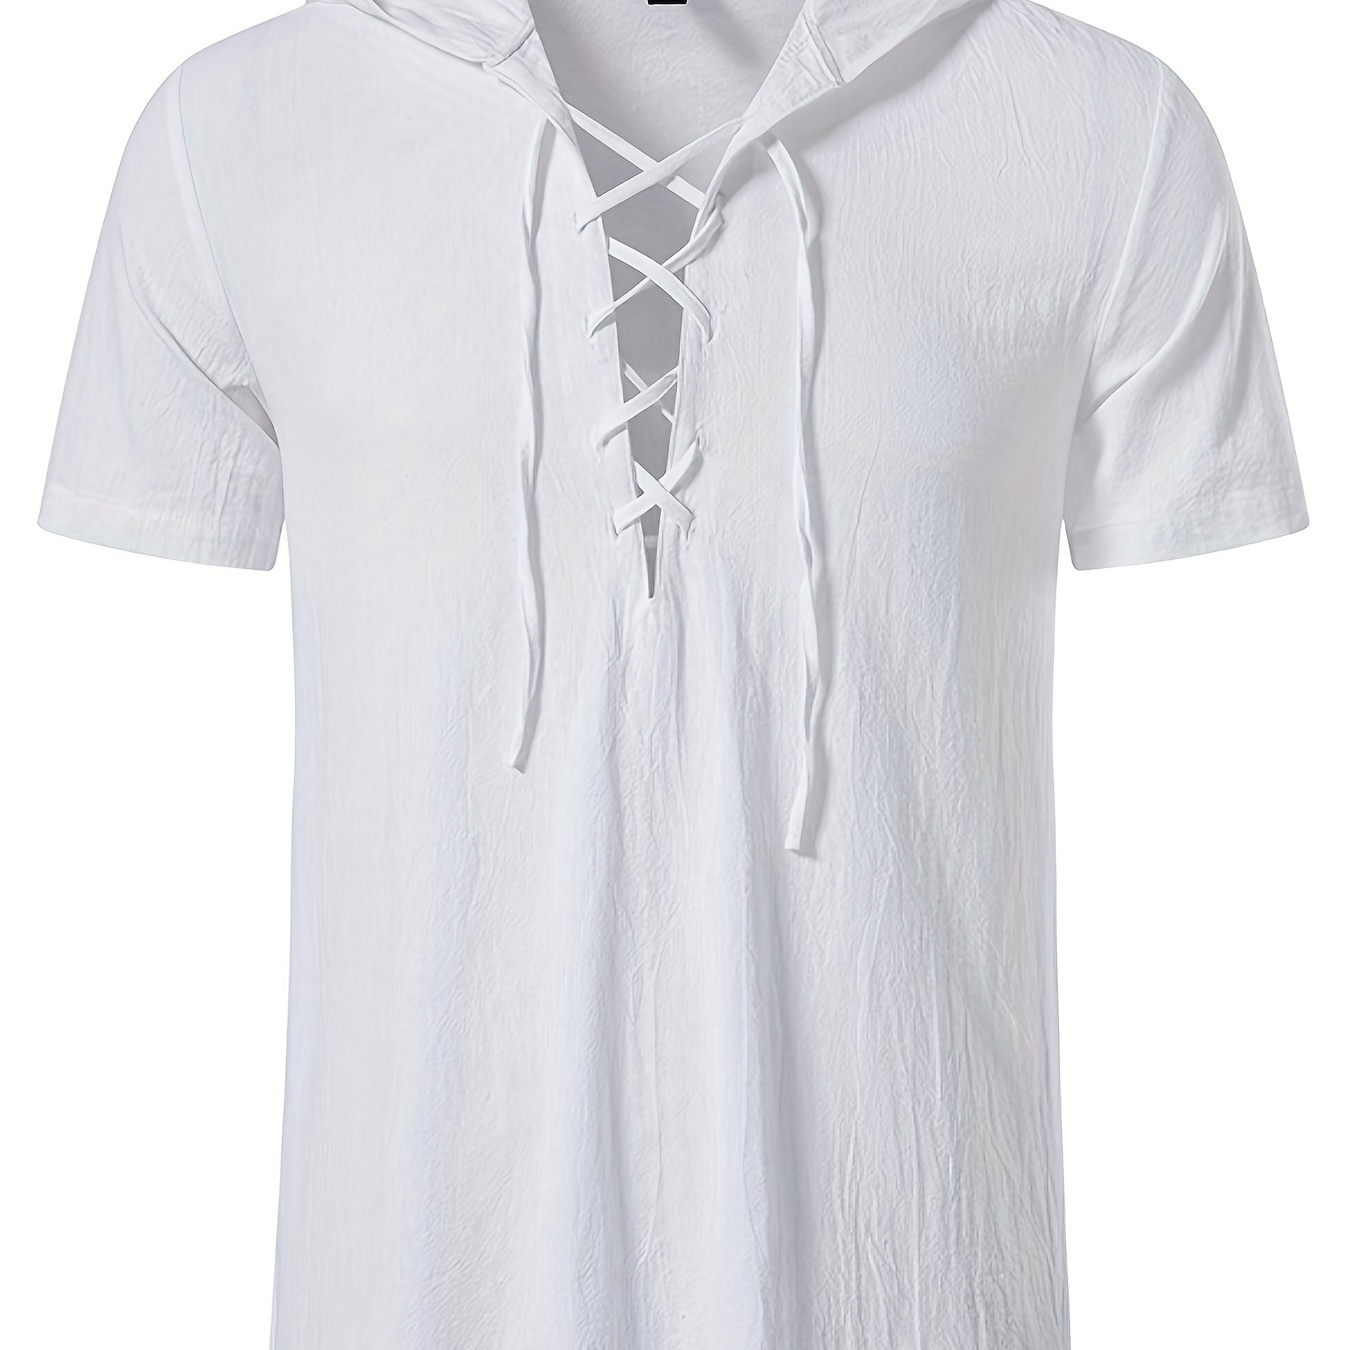 

Trendy Men's Casual Lace Up Hooded Short Sleeve Cotton Shirt, Men's Shirt For Summer Vacation Resort